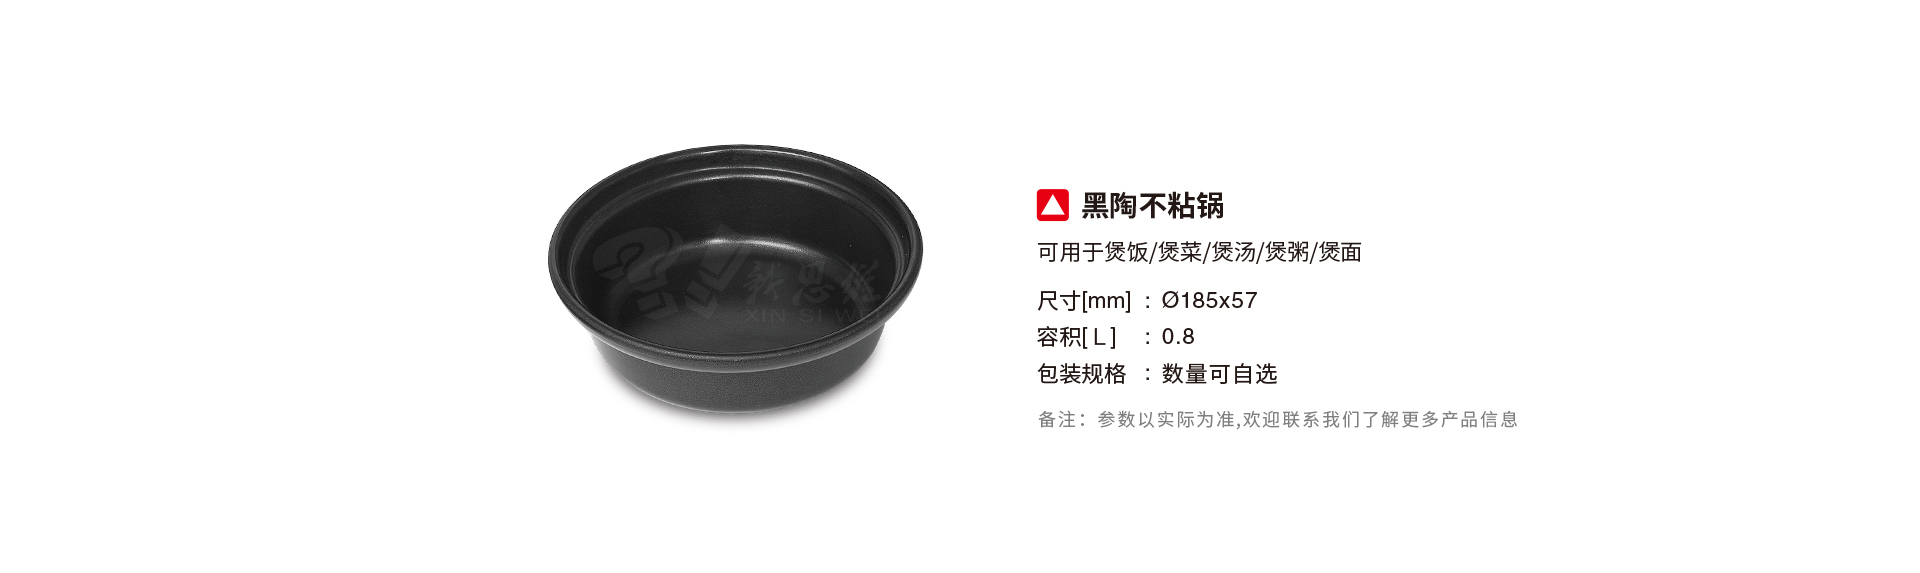 xinsiwei_supporing_materials_black_pottery_non_stick_pot_details_page_product_parameters.jpg